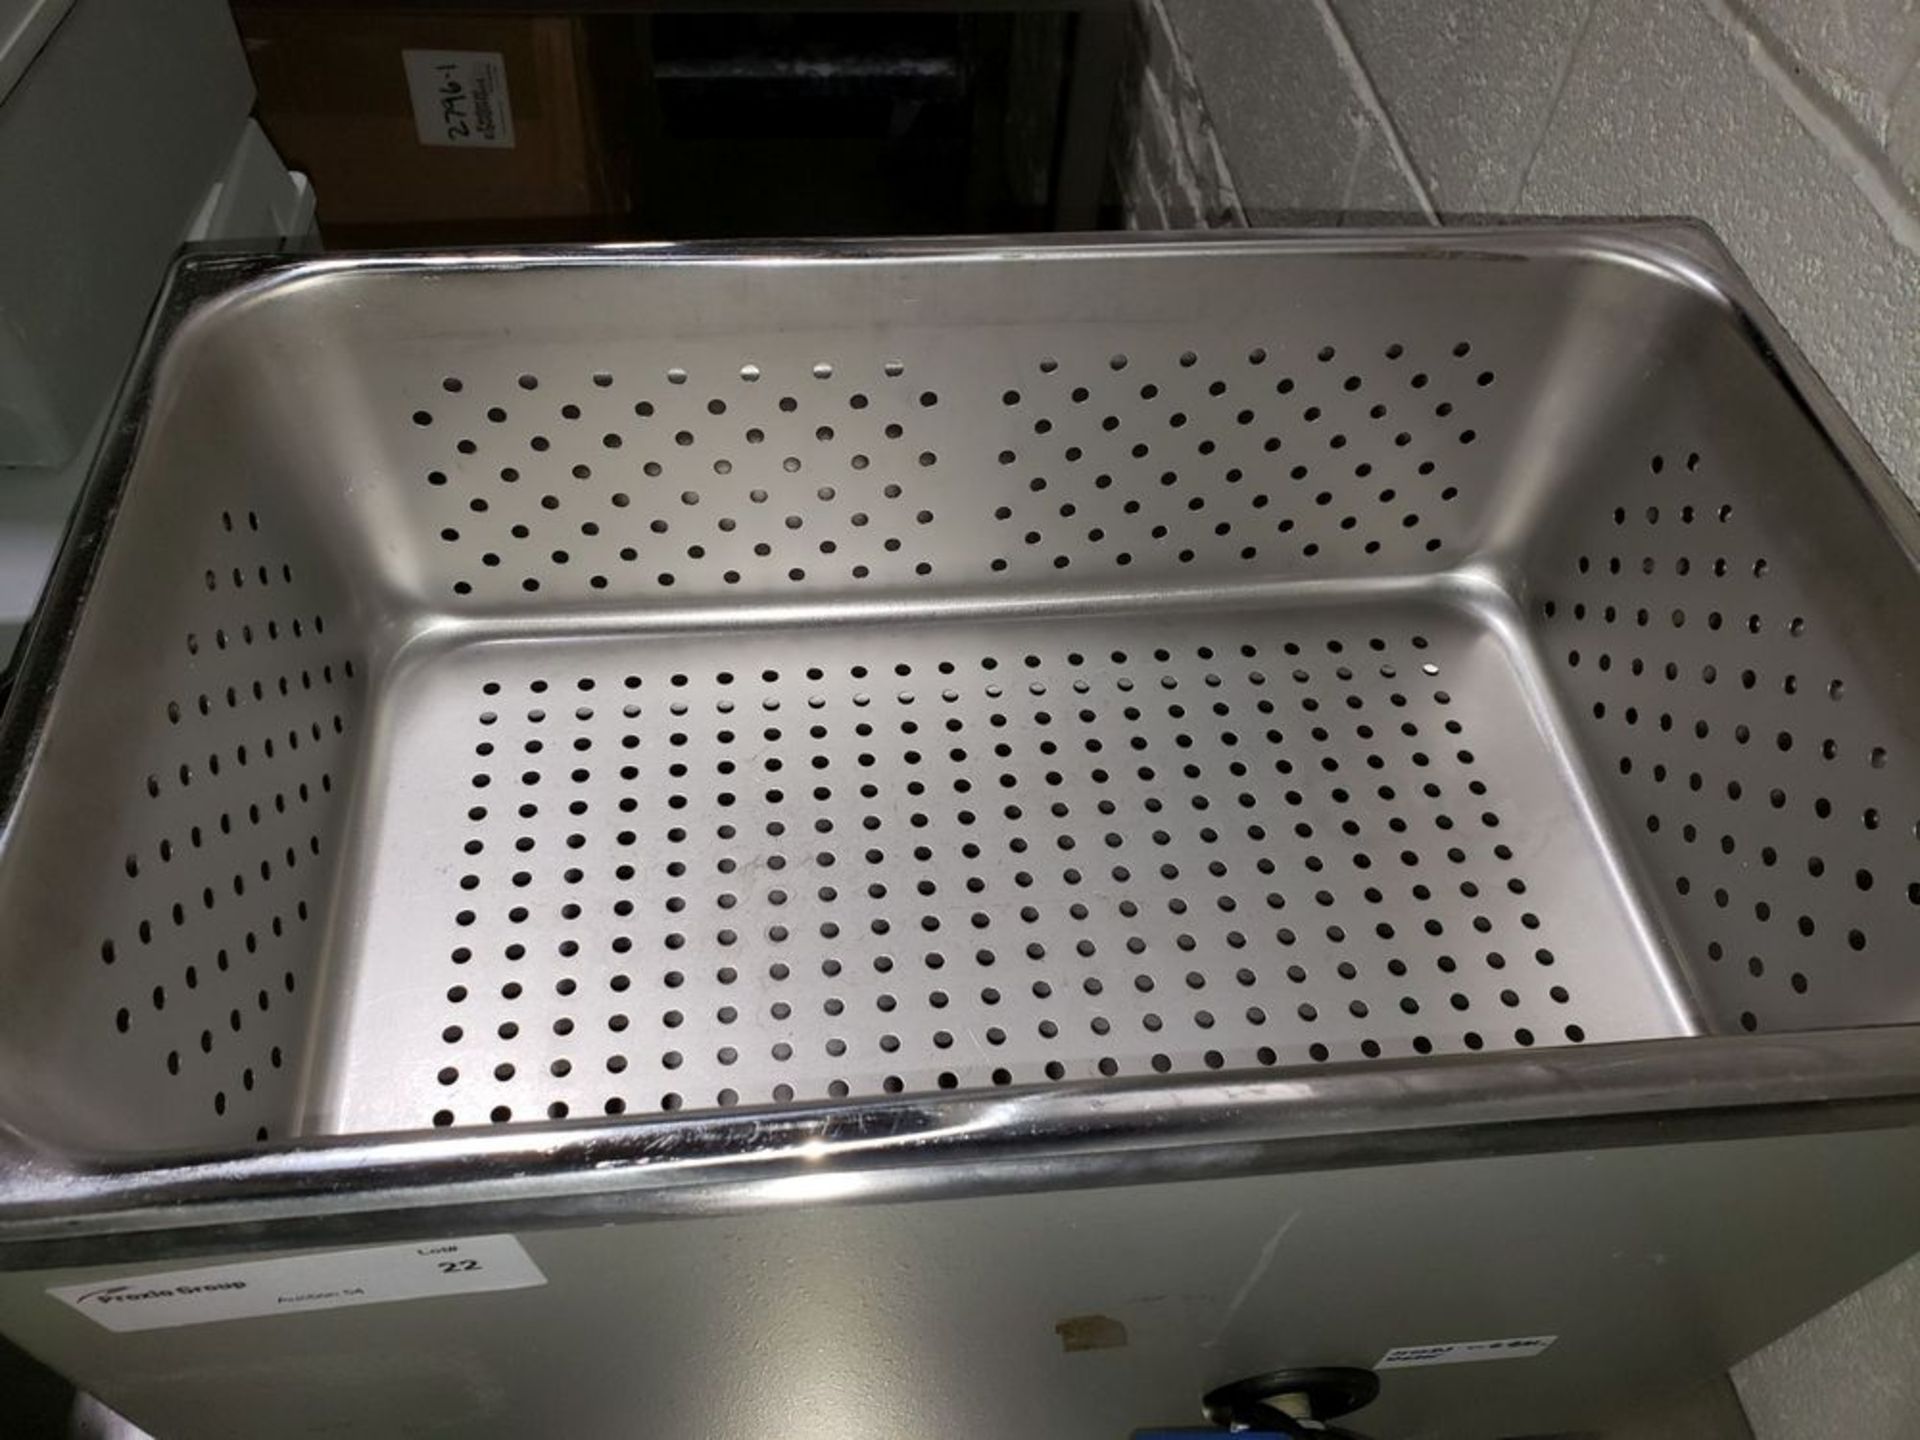 Branson Ultrasonic Cleaner, Model B-92-H, with (2) baskets - Image 5 of 8